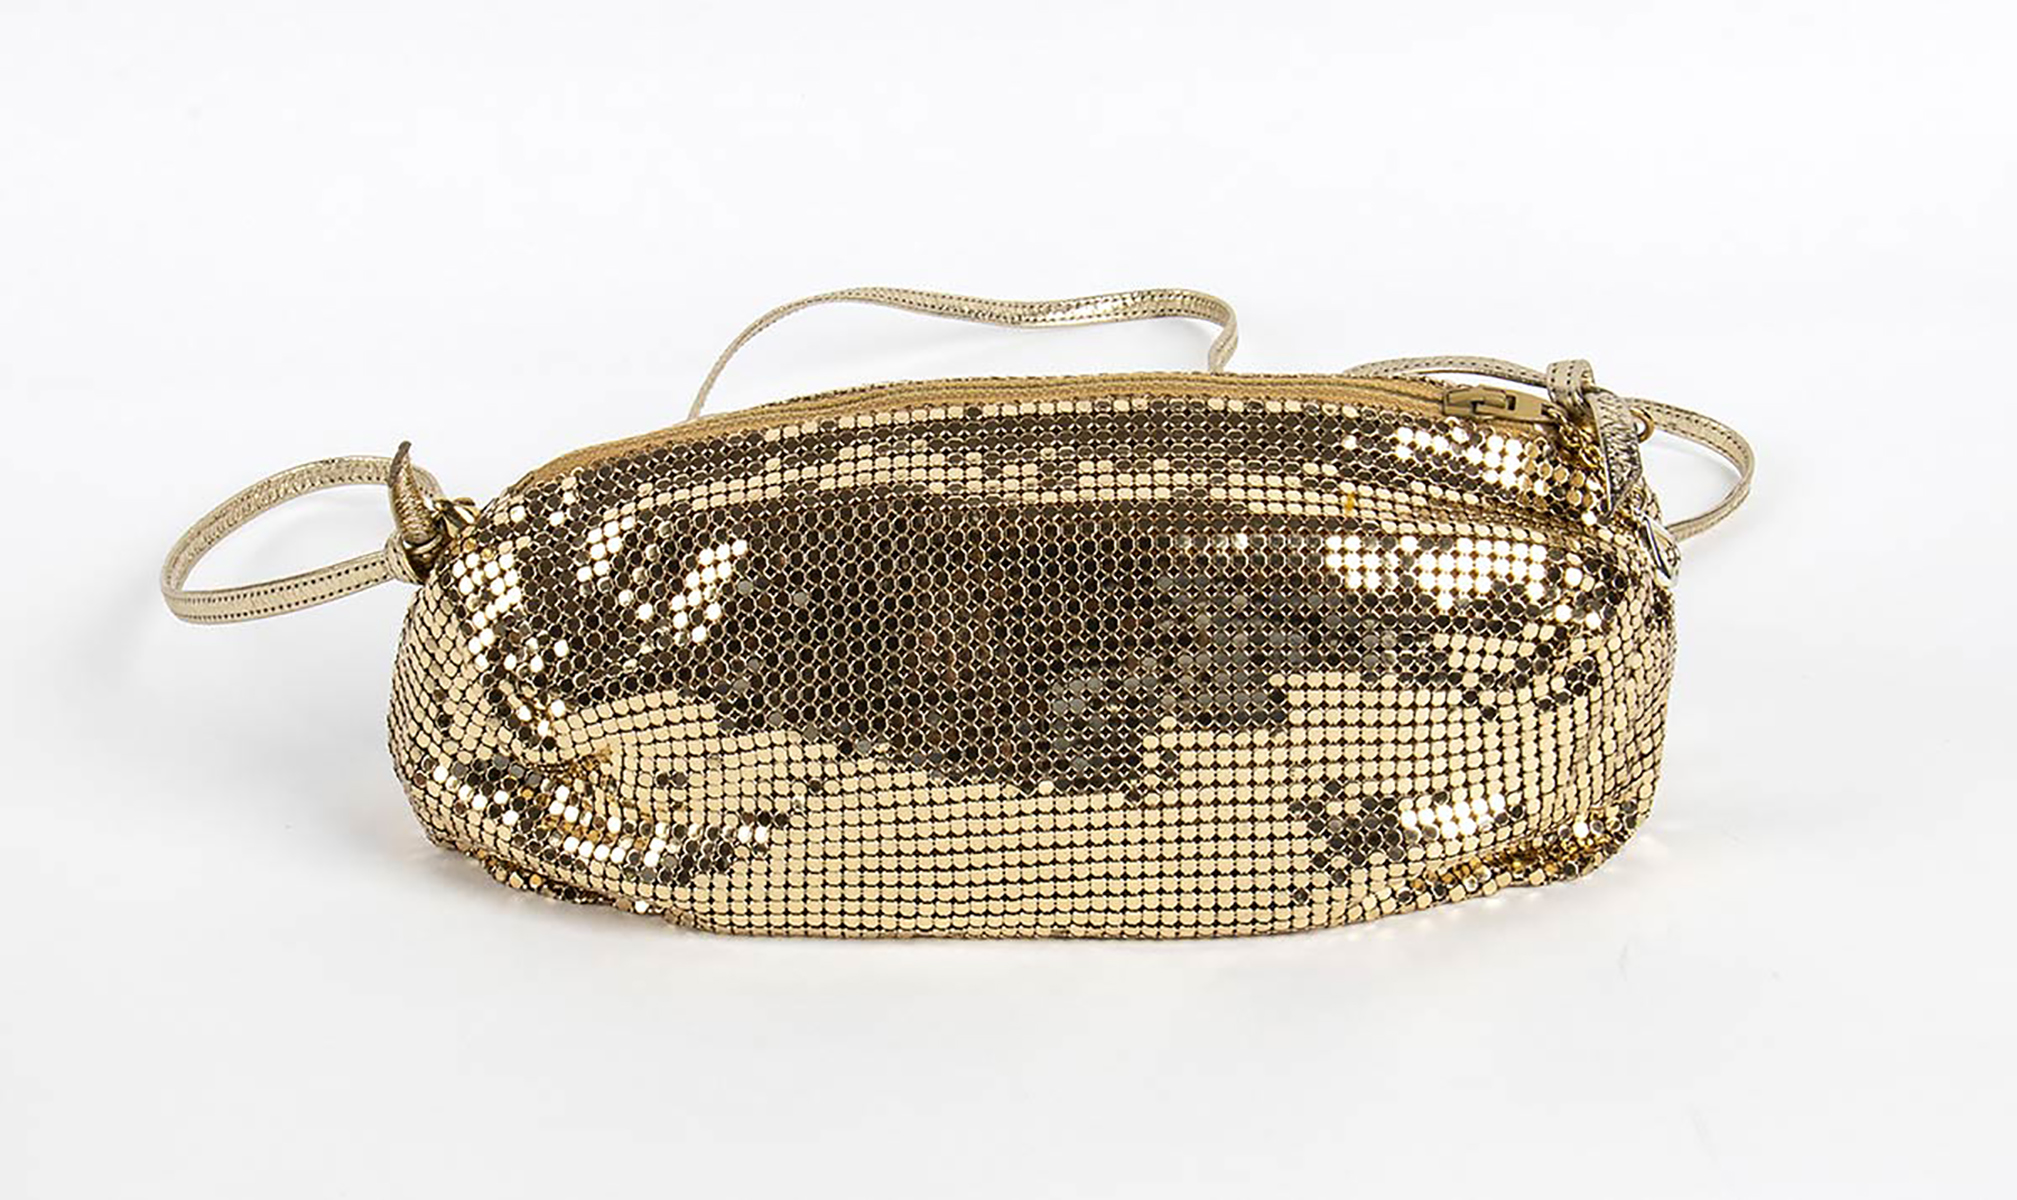 WHITING & DAVIS METAL MESH PURSE 80s A gilded metal mesh evening purse. General Conditions grading